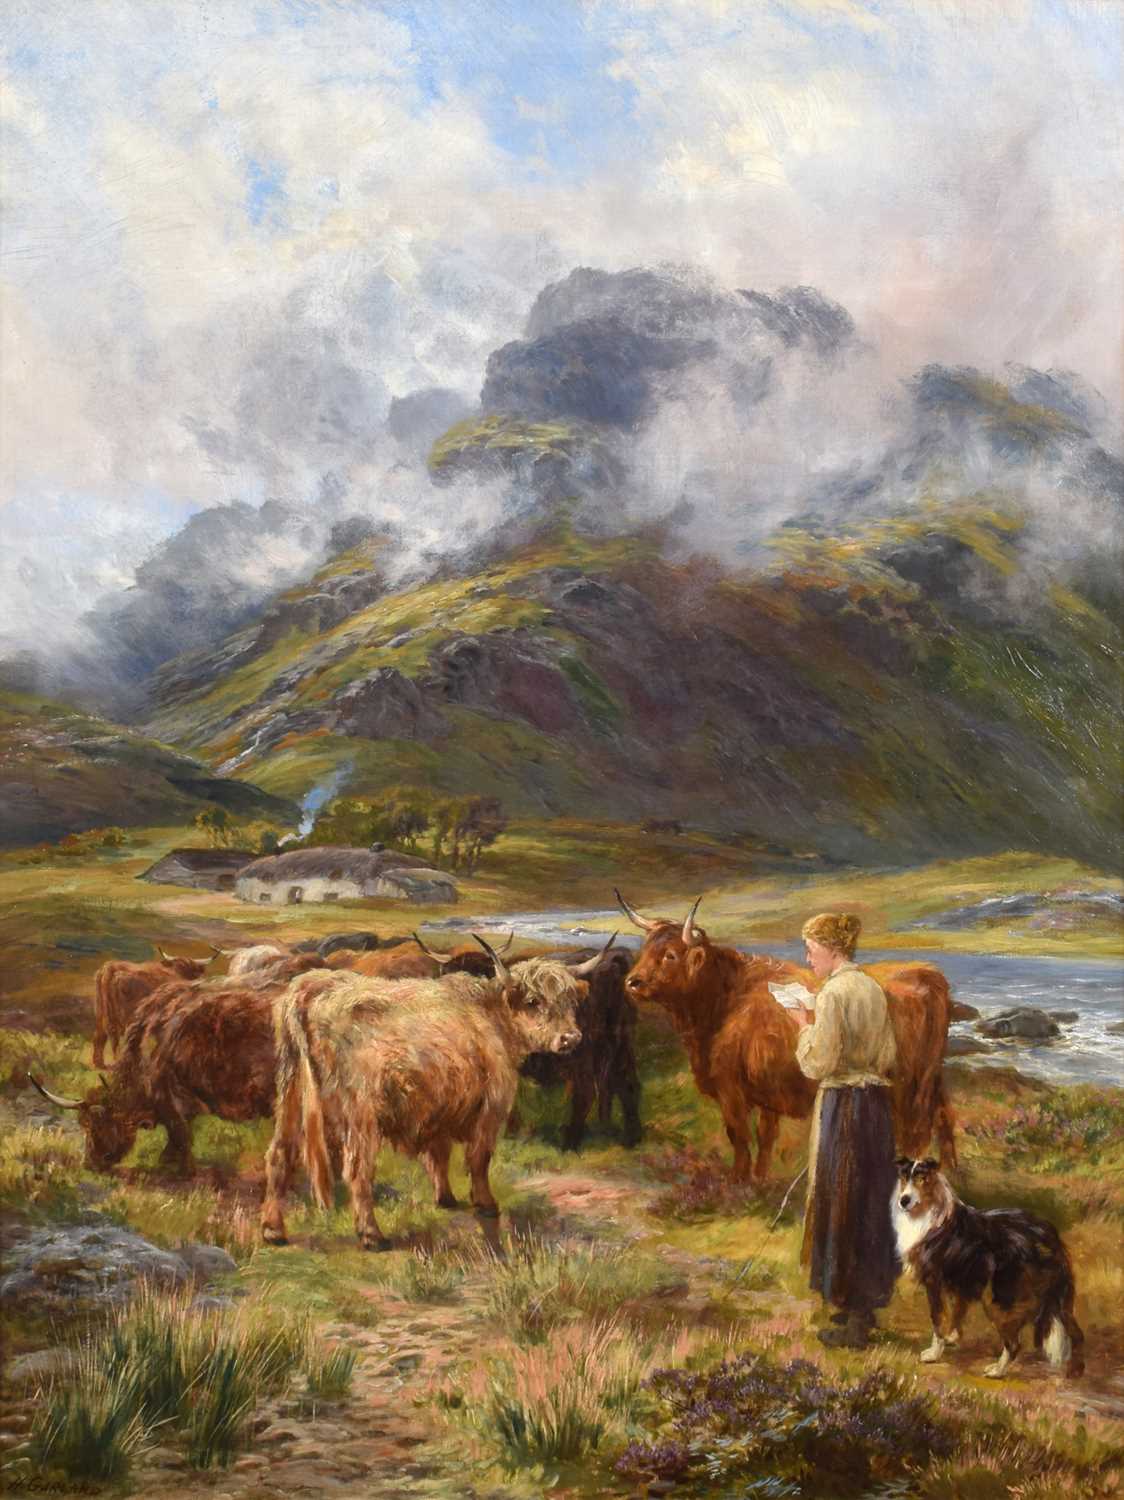 Henry Garland (British 1834-1913) "Driving the Cattle 'Hame'"